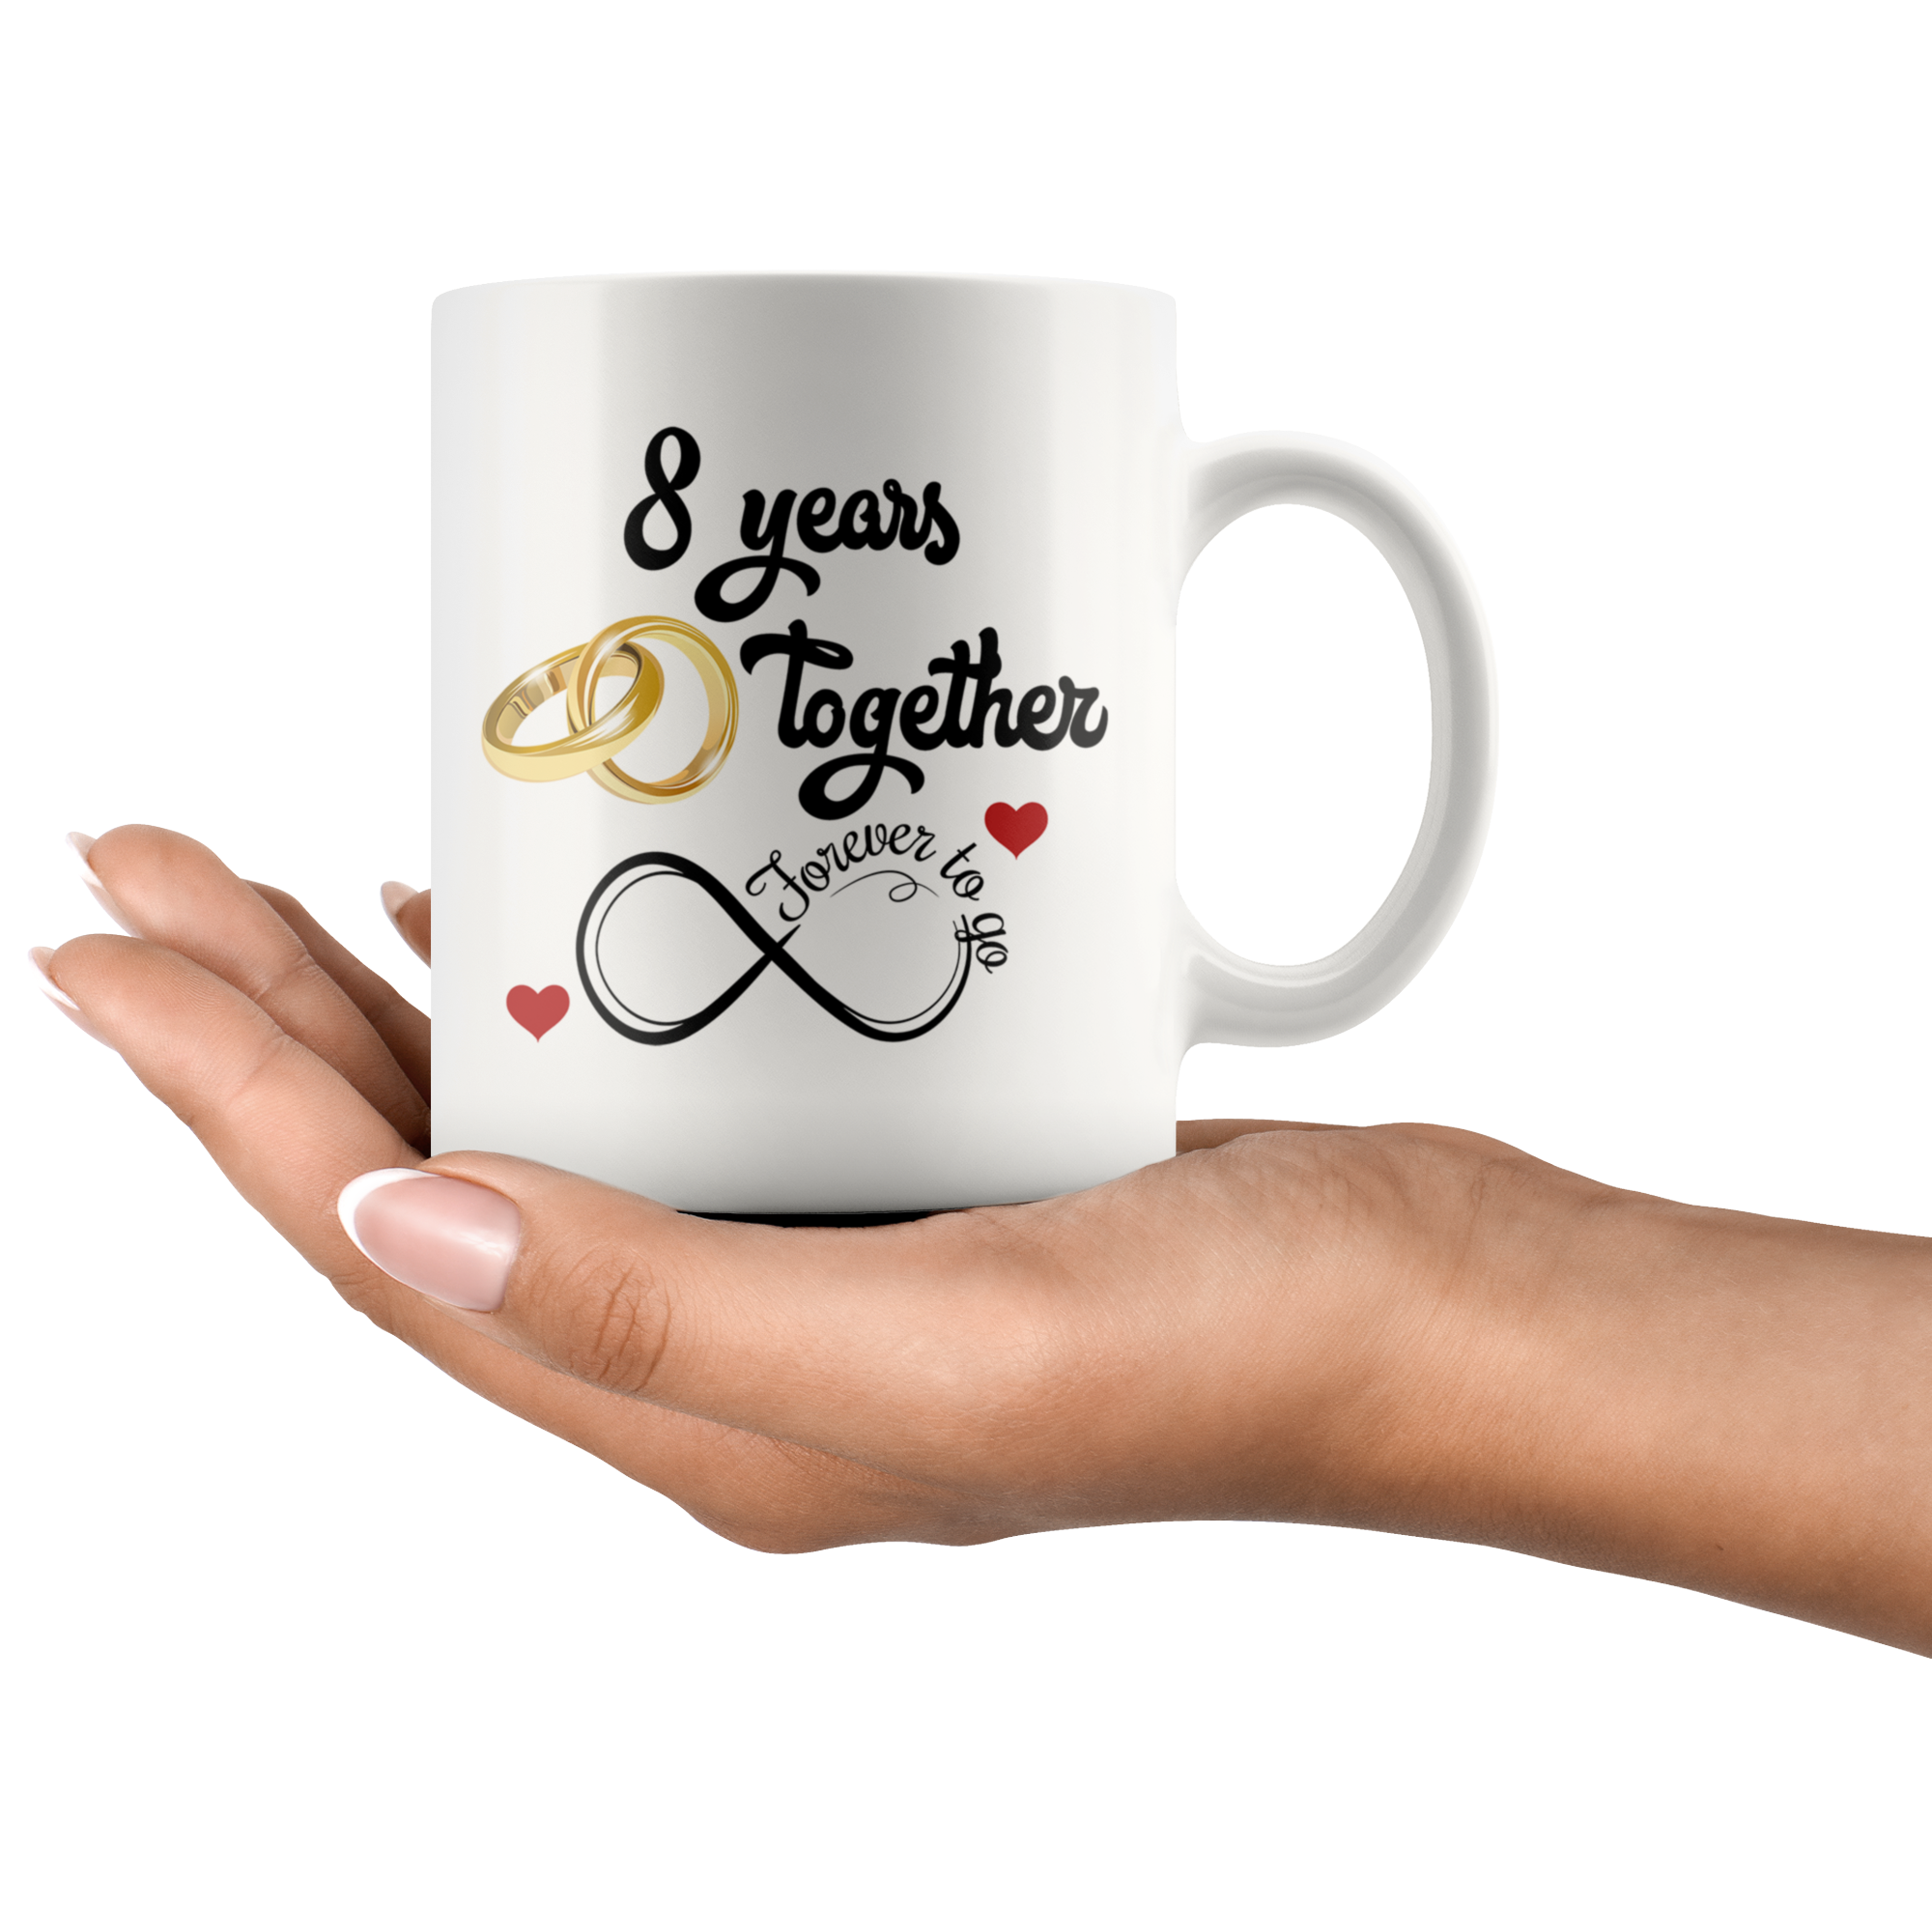 8th Wedding Anniversary Gift For Him Her 8 Years Together 8th Year Of Marriage  Anniversary Funny Couple Matching